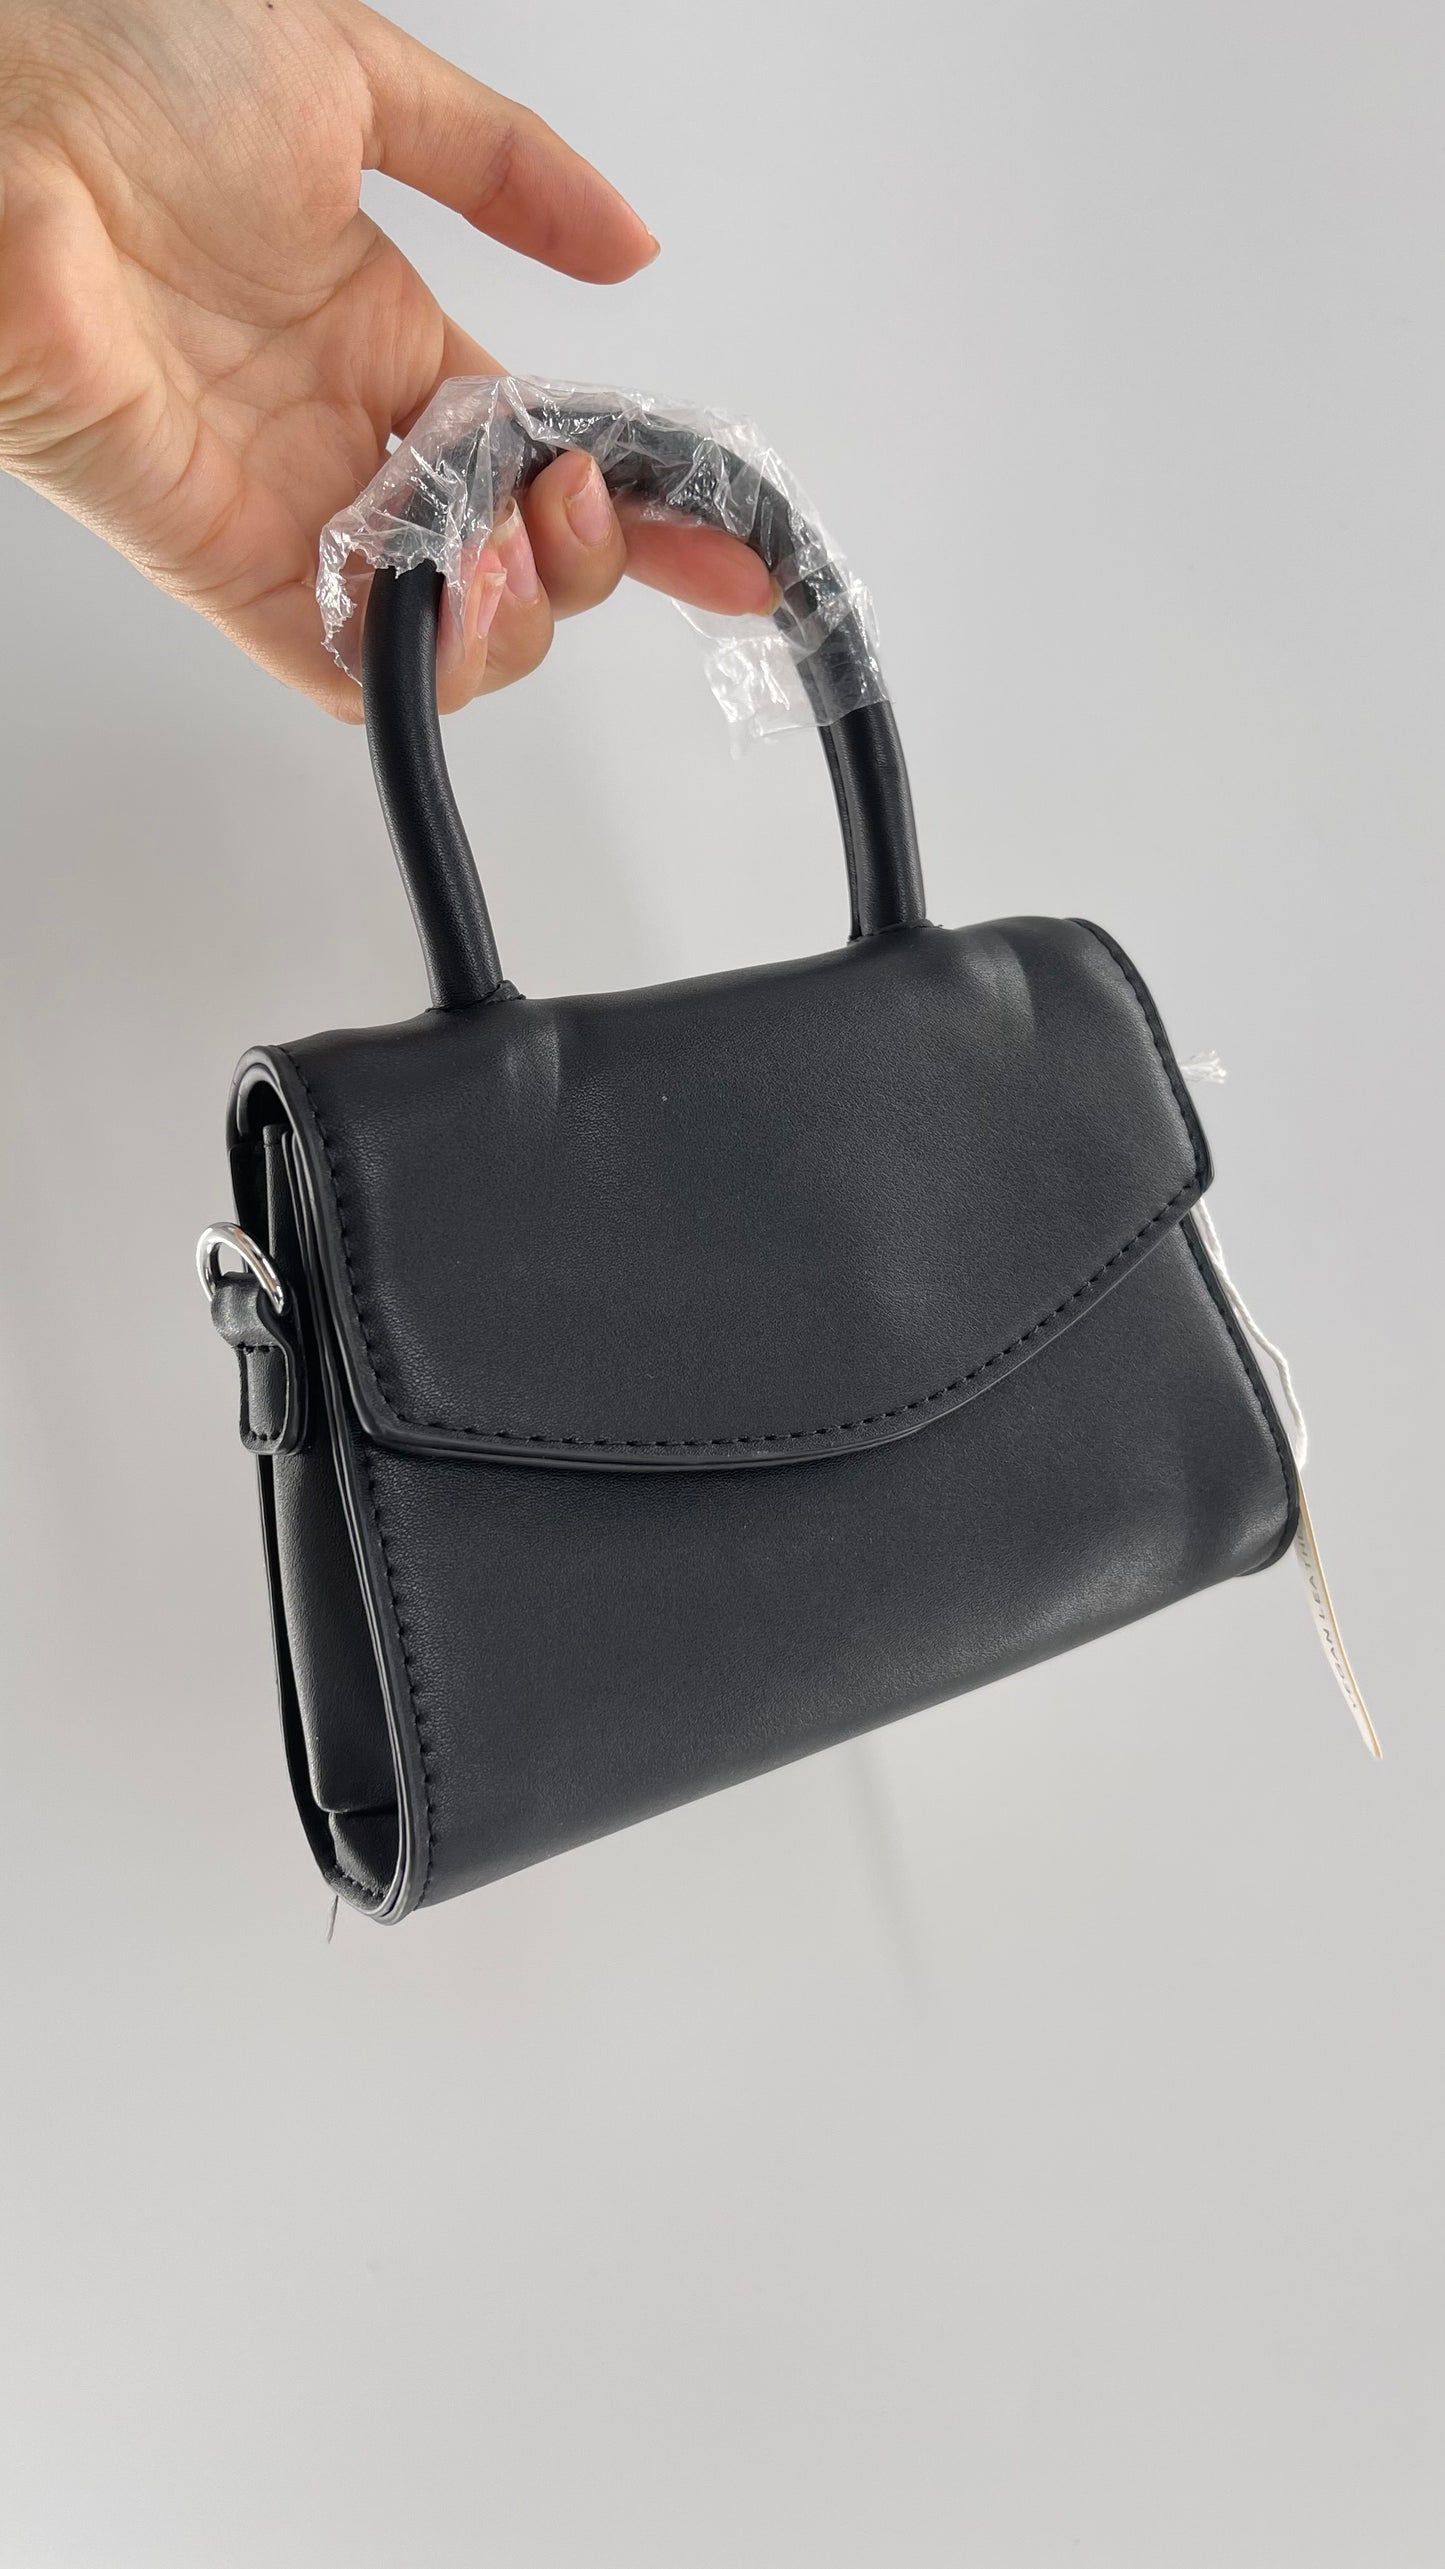 Urban Outfitters Black Vegan Leather Ultra Mini Purse with Detachable Crossbody Strap